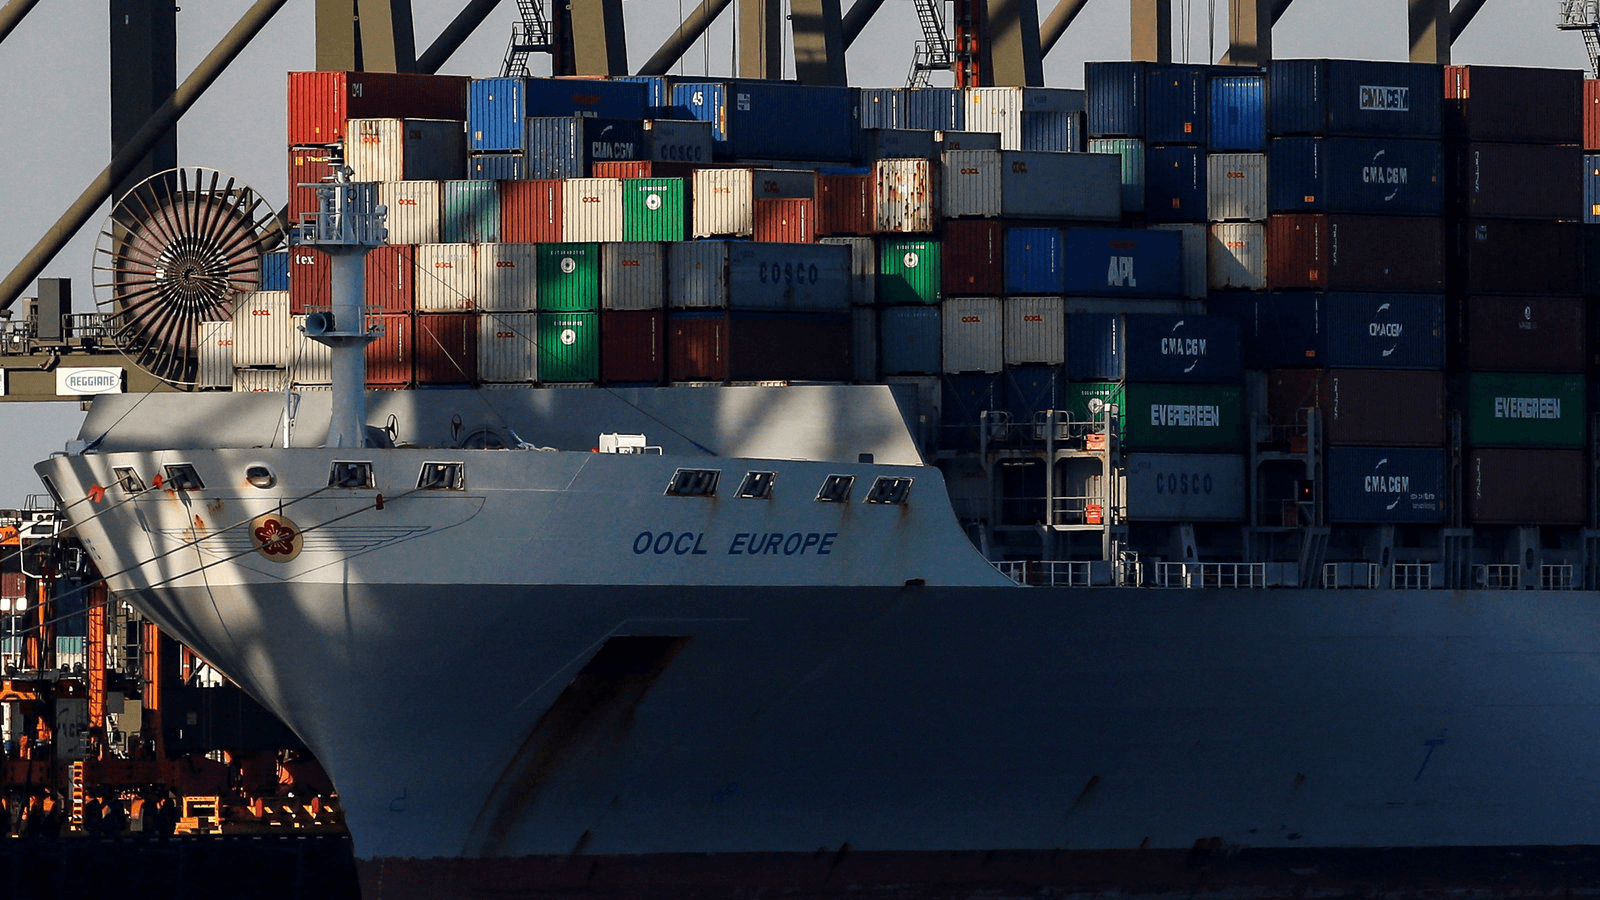 The OOCL Europe is docked at the Port of Newark in Newark, New Jersey, Nov. 27, 2017. 